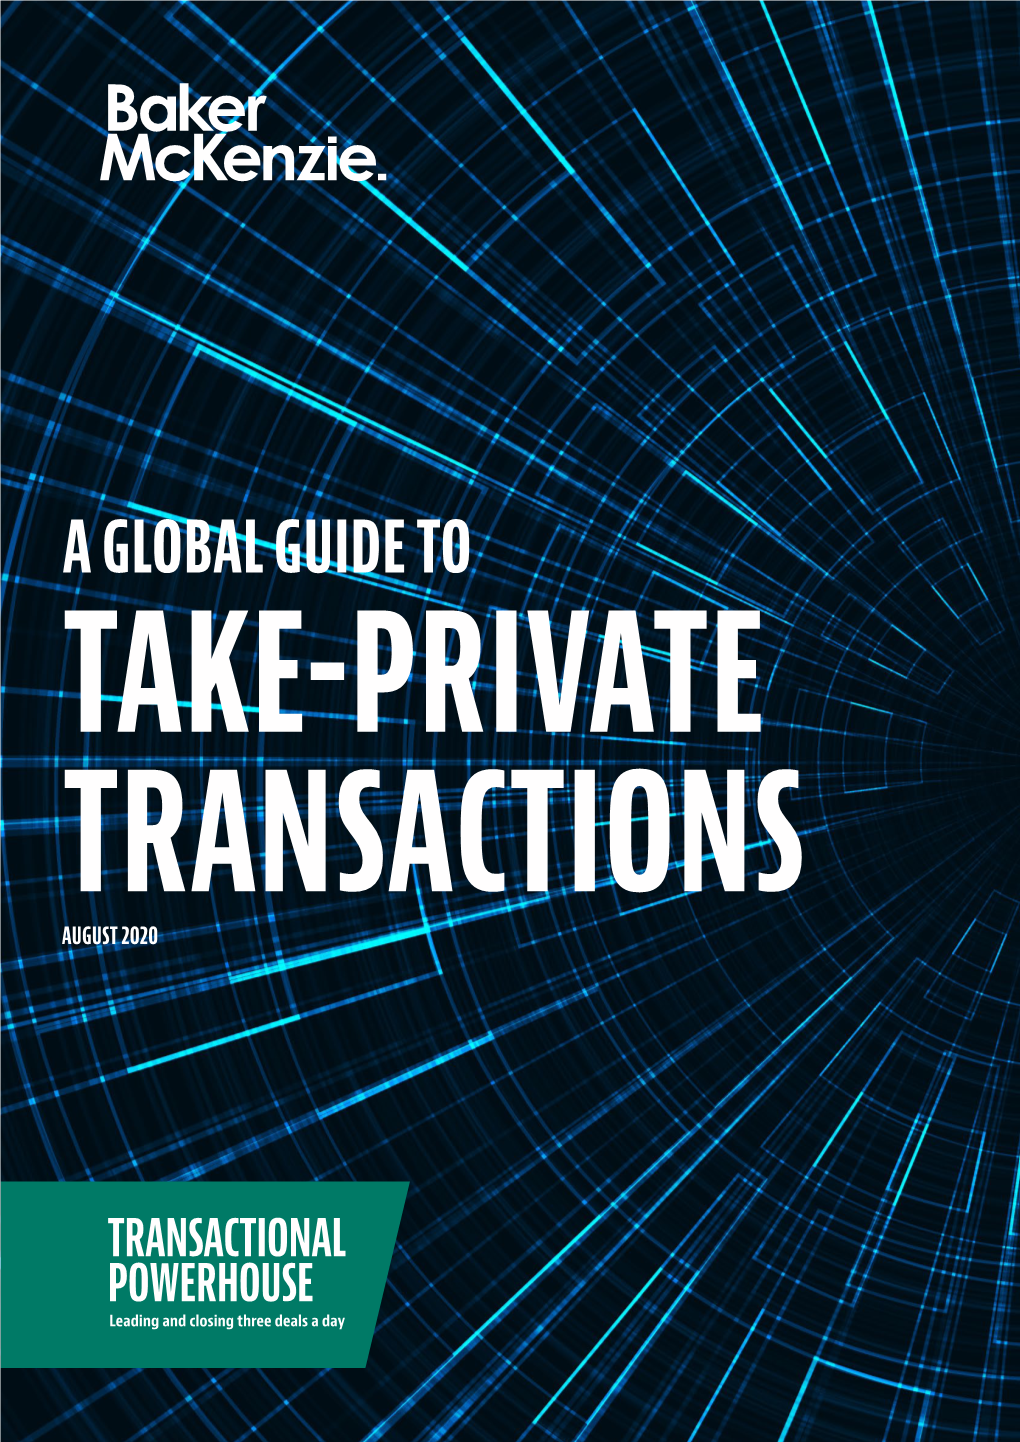 A Global Guide to Take-Private Transactions August 2020